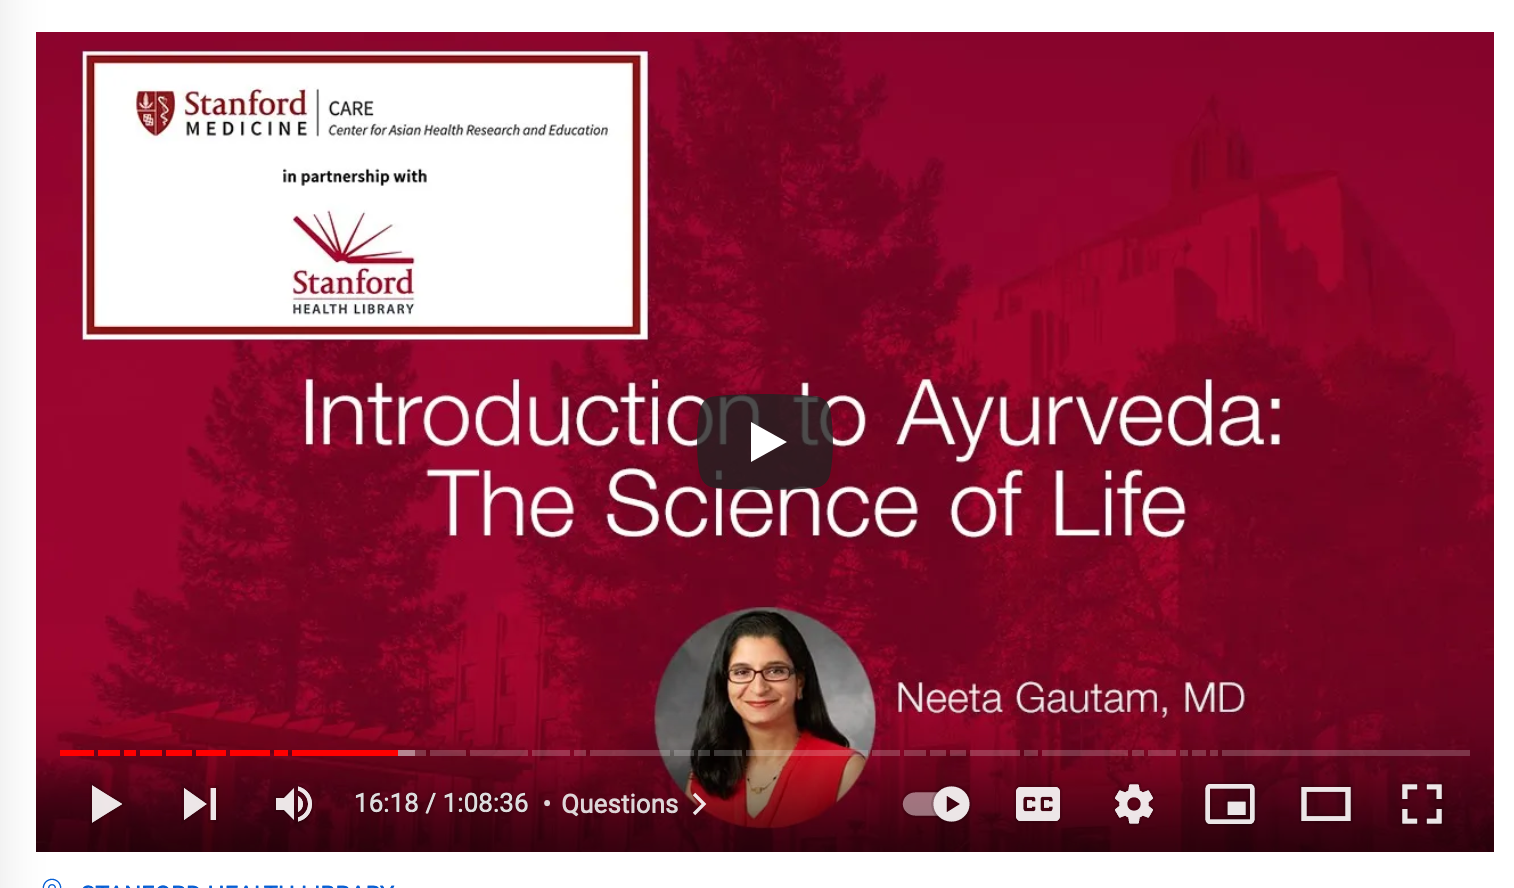 Video laden: Introduction to Ayurveda the science of life